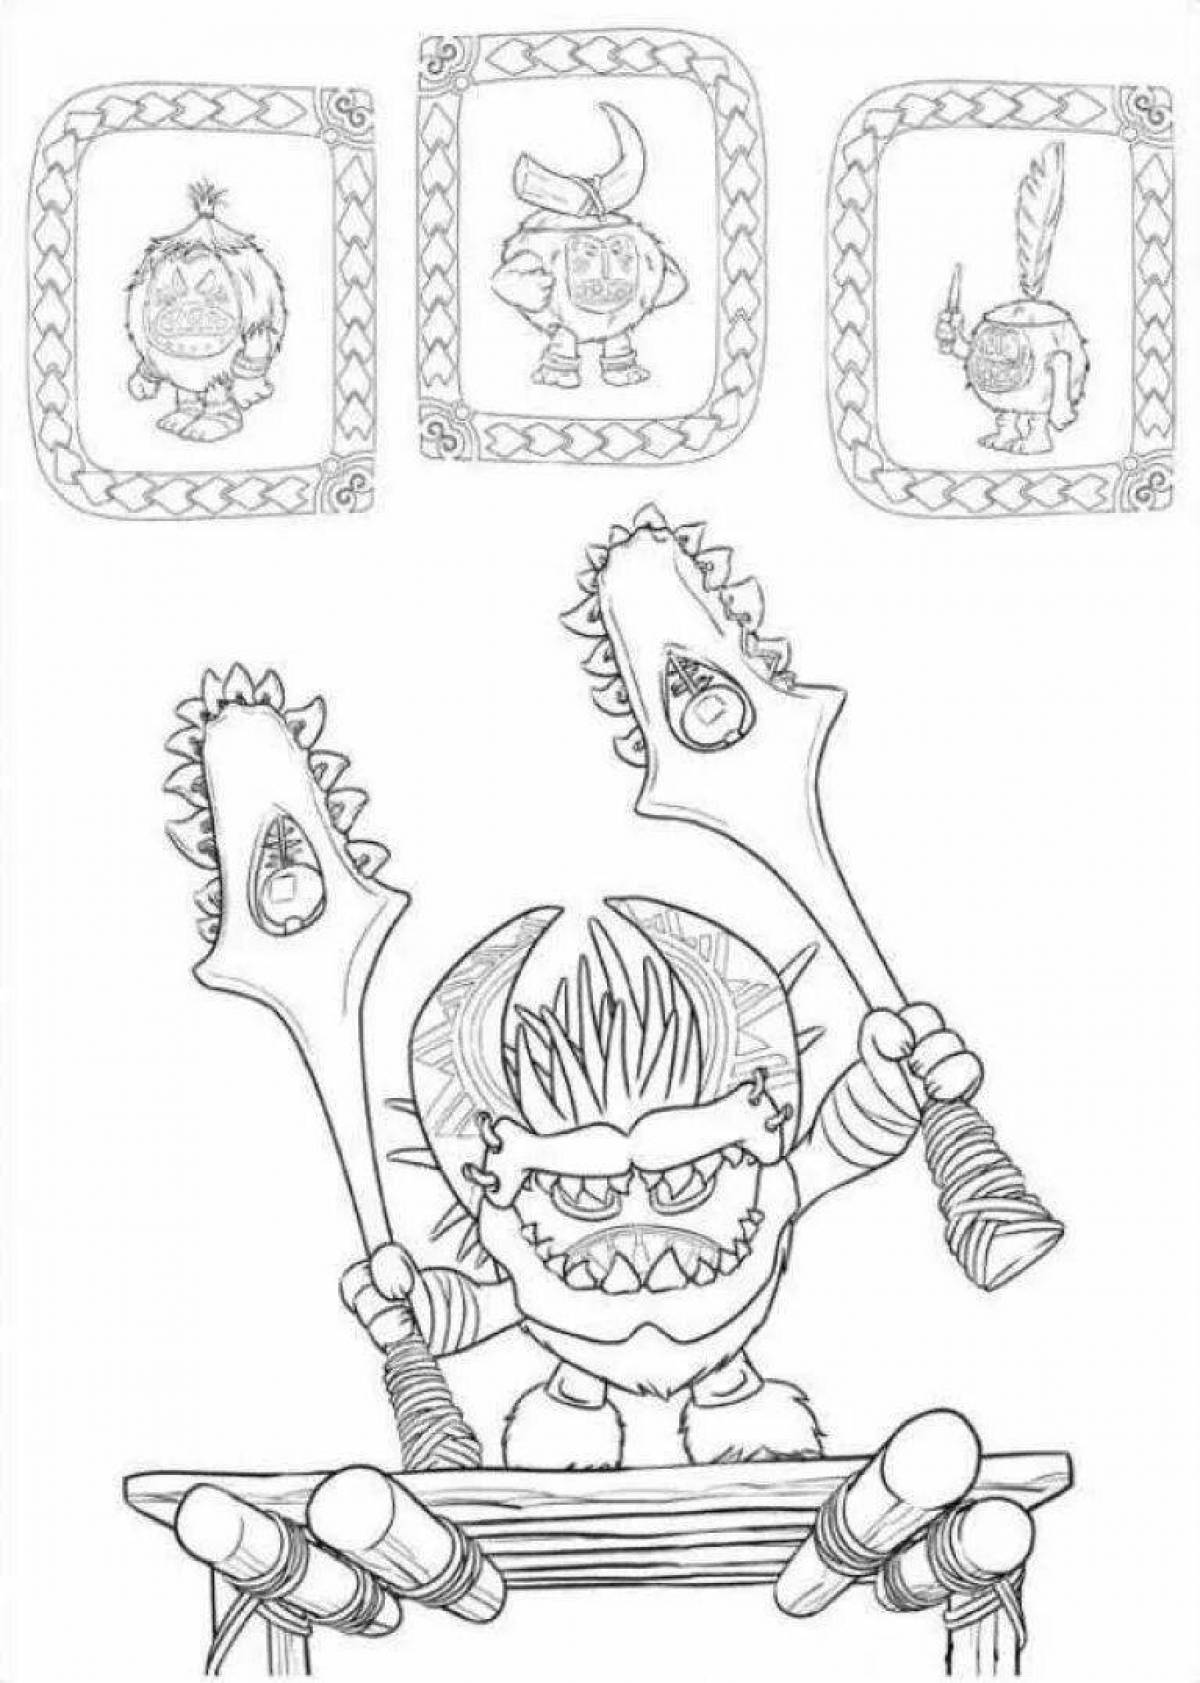 Witty moana crab coloring book